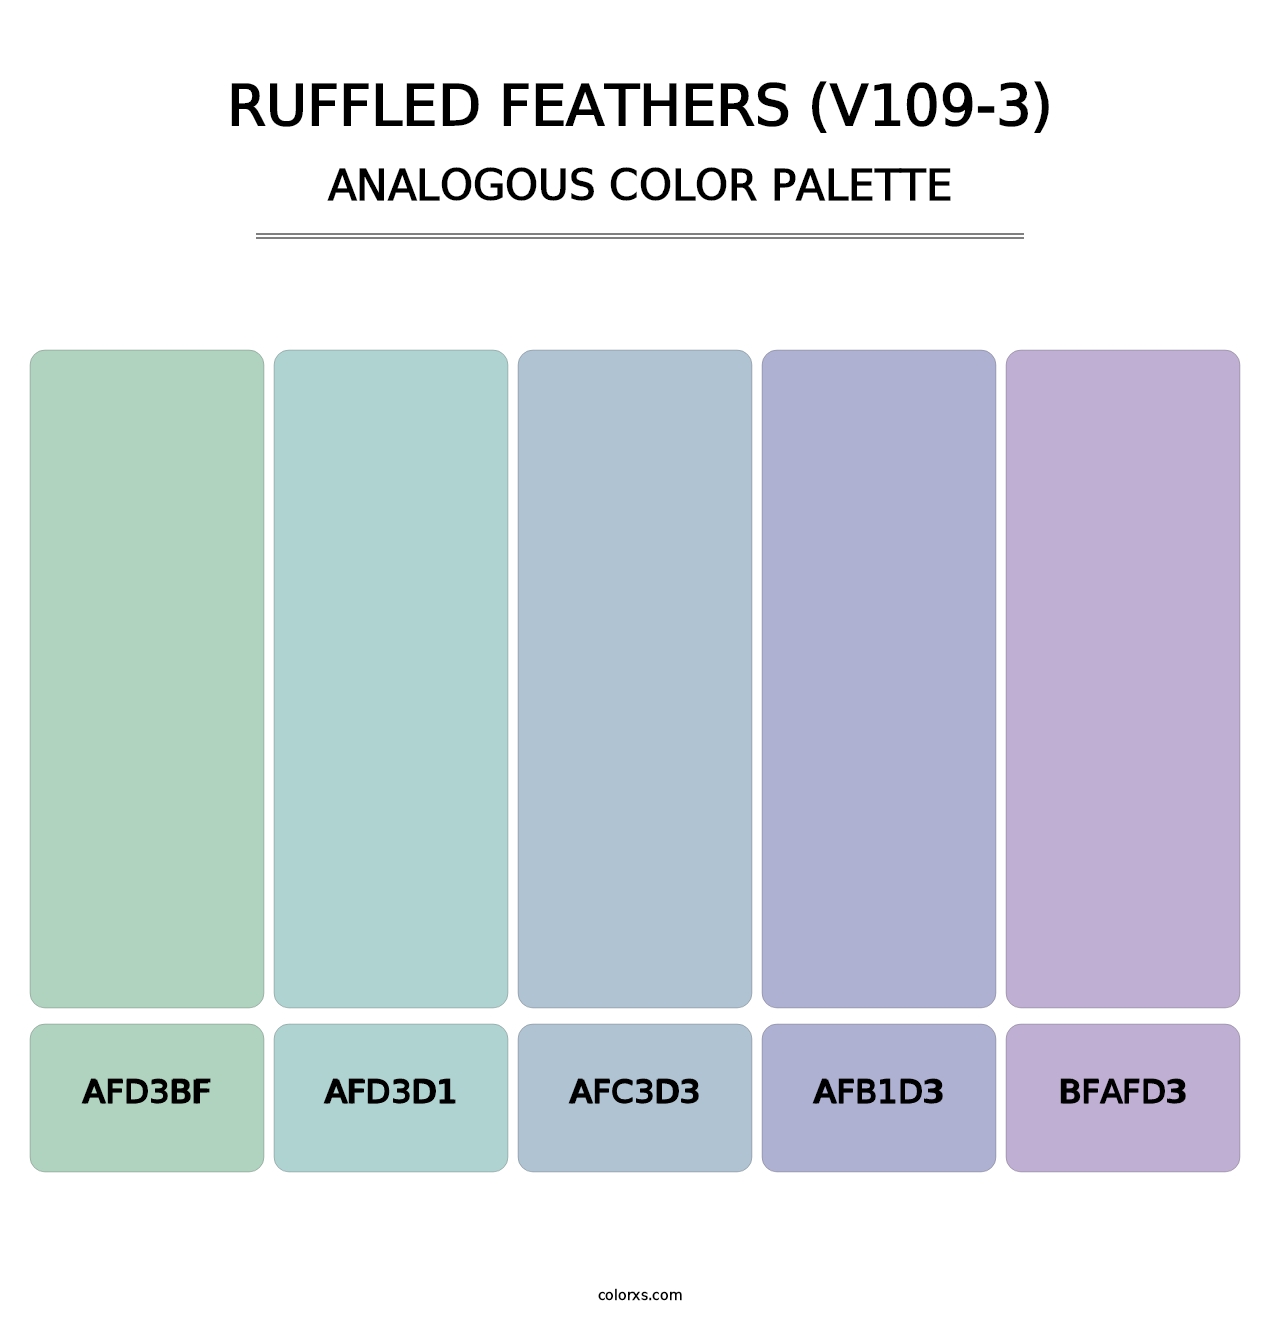 Ruffled Feathers (V109-3) - Analogous Color Palette